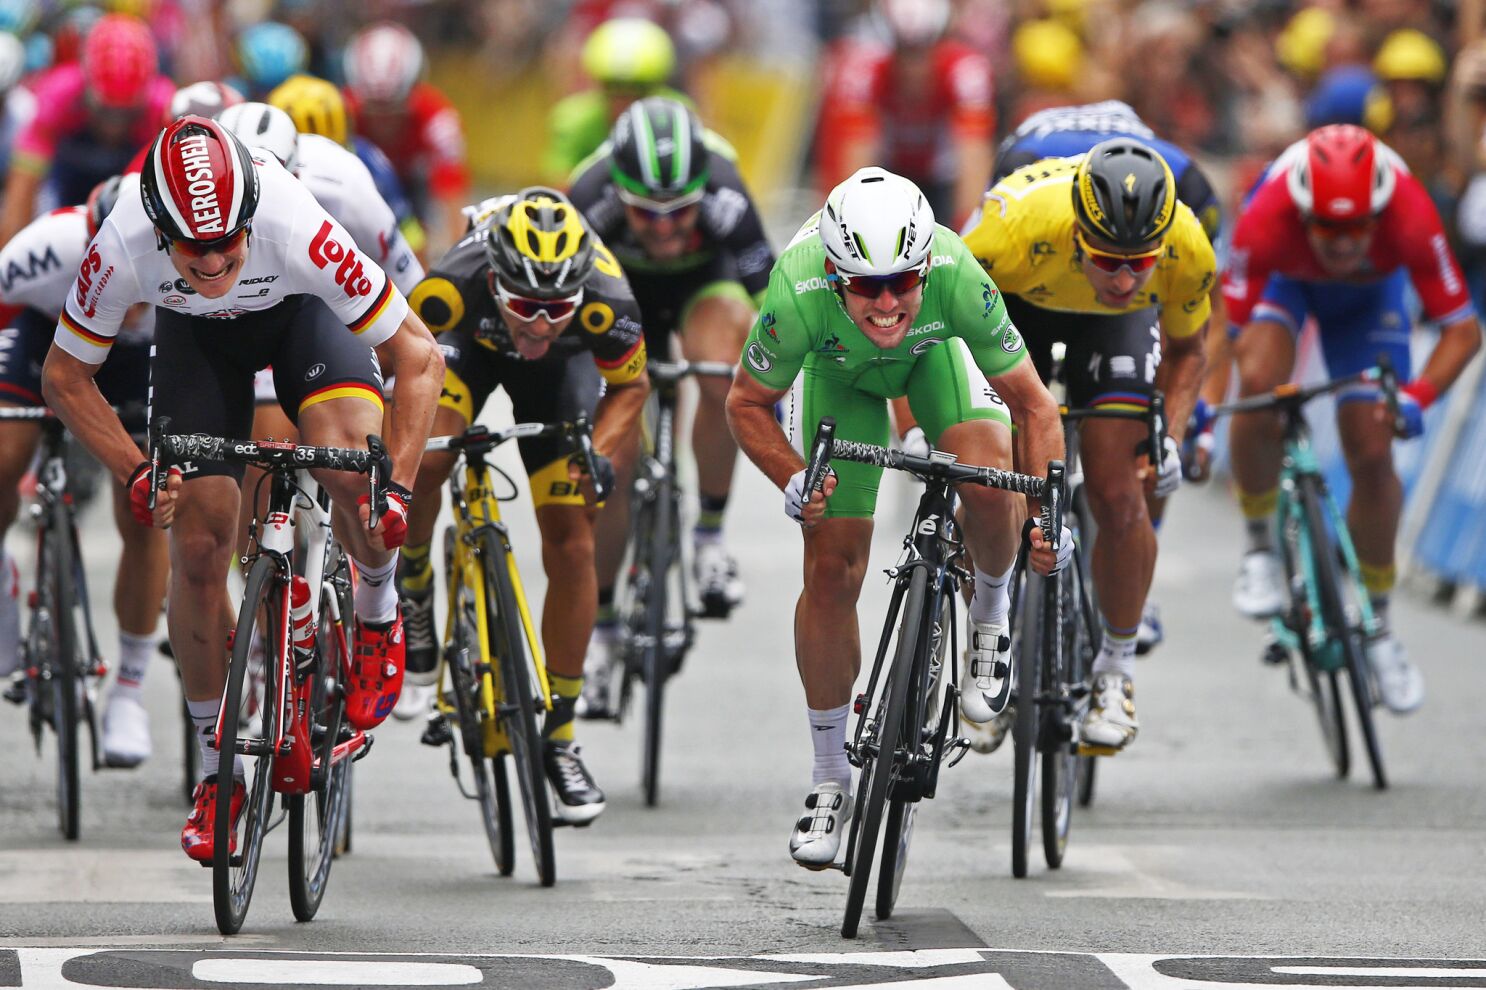 symbol renere tag Mark Cavendish sprints to Tour de France Stage 3 victory in photo finish -  Los Angeles Times